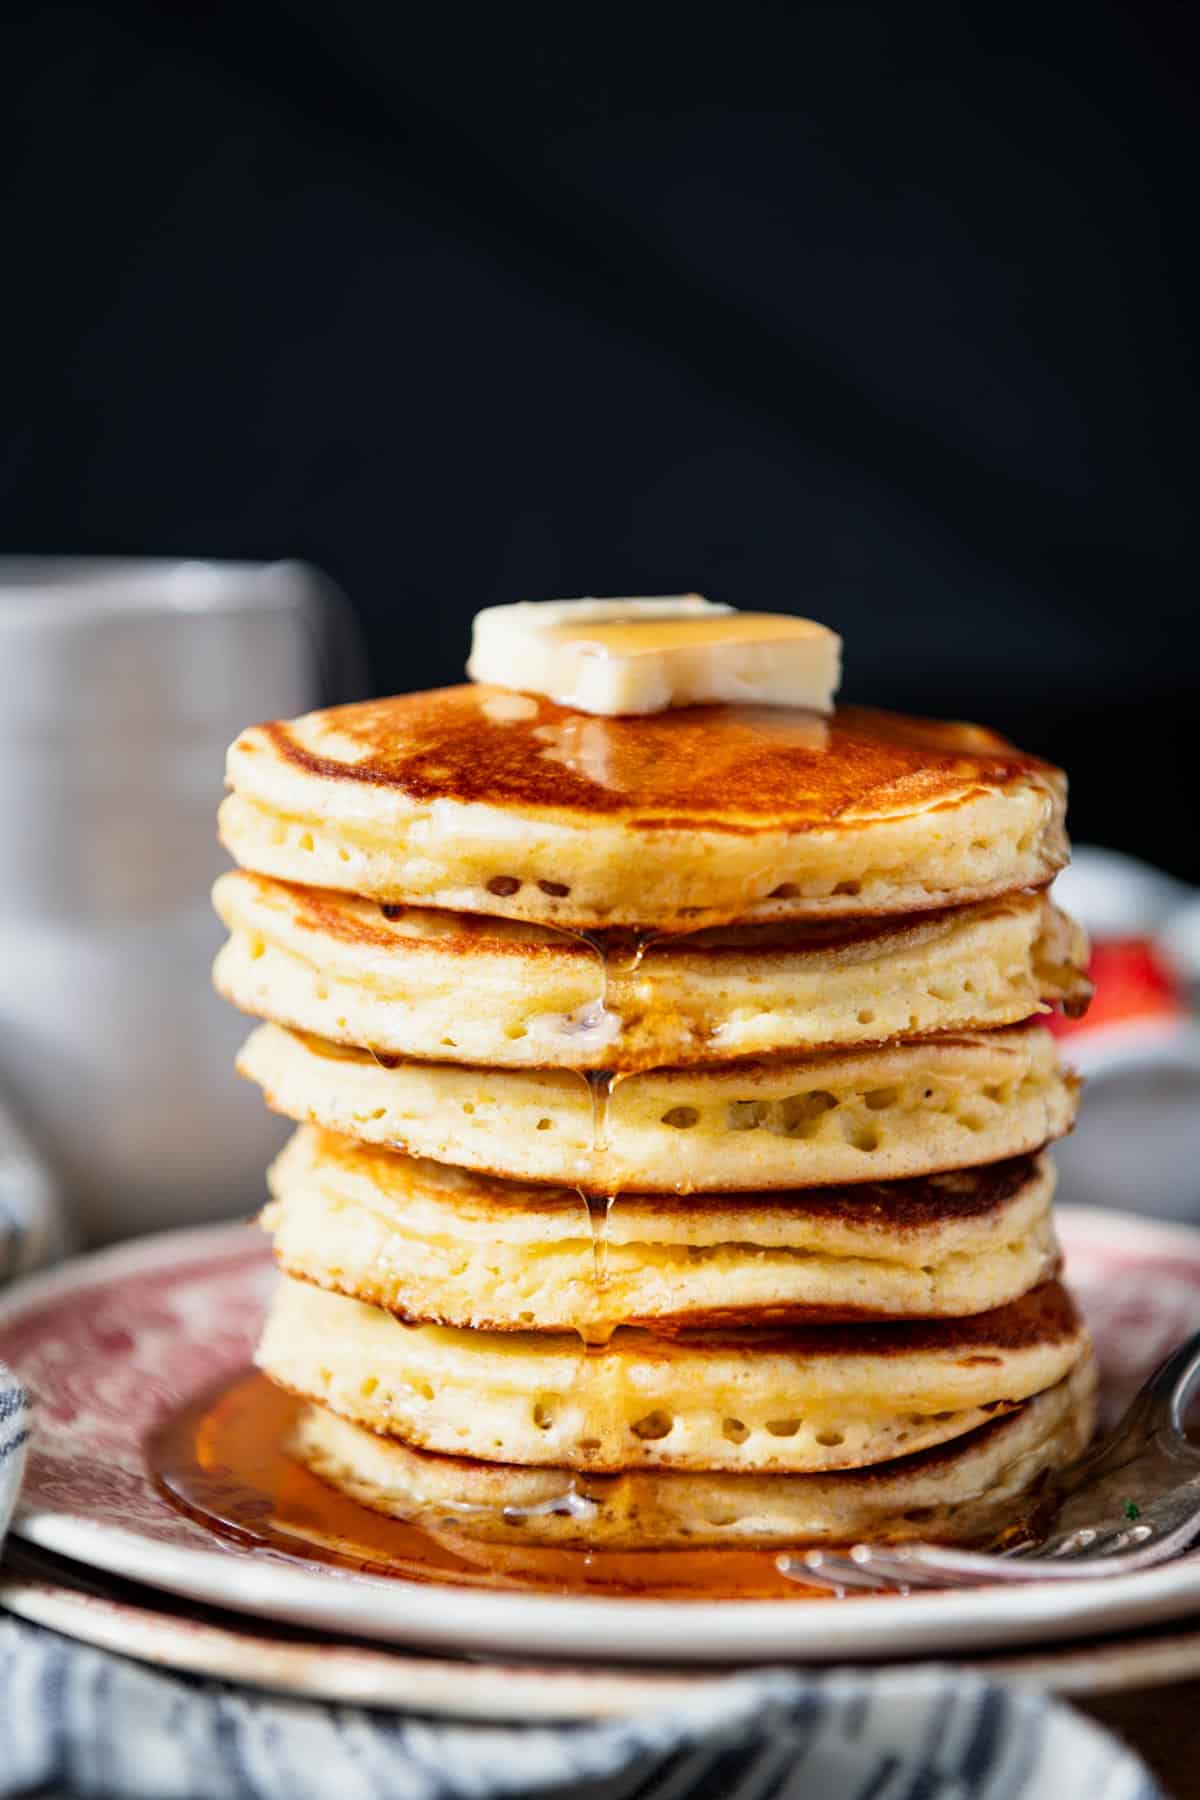 Close up side shot of a stack of Jiffy cornmeal pancakes on a read and white plate.